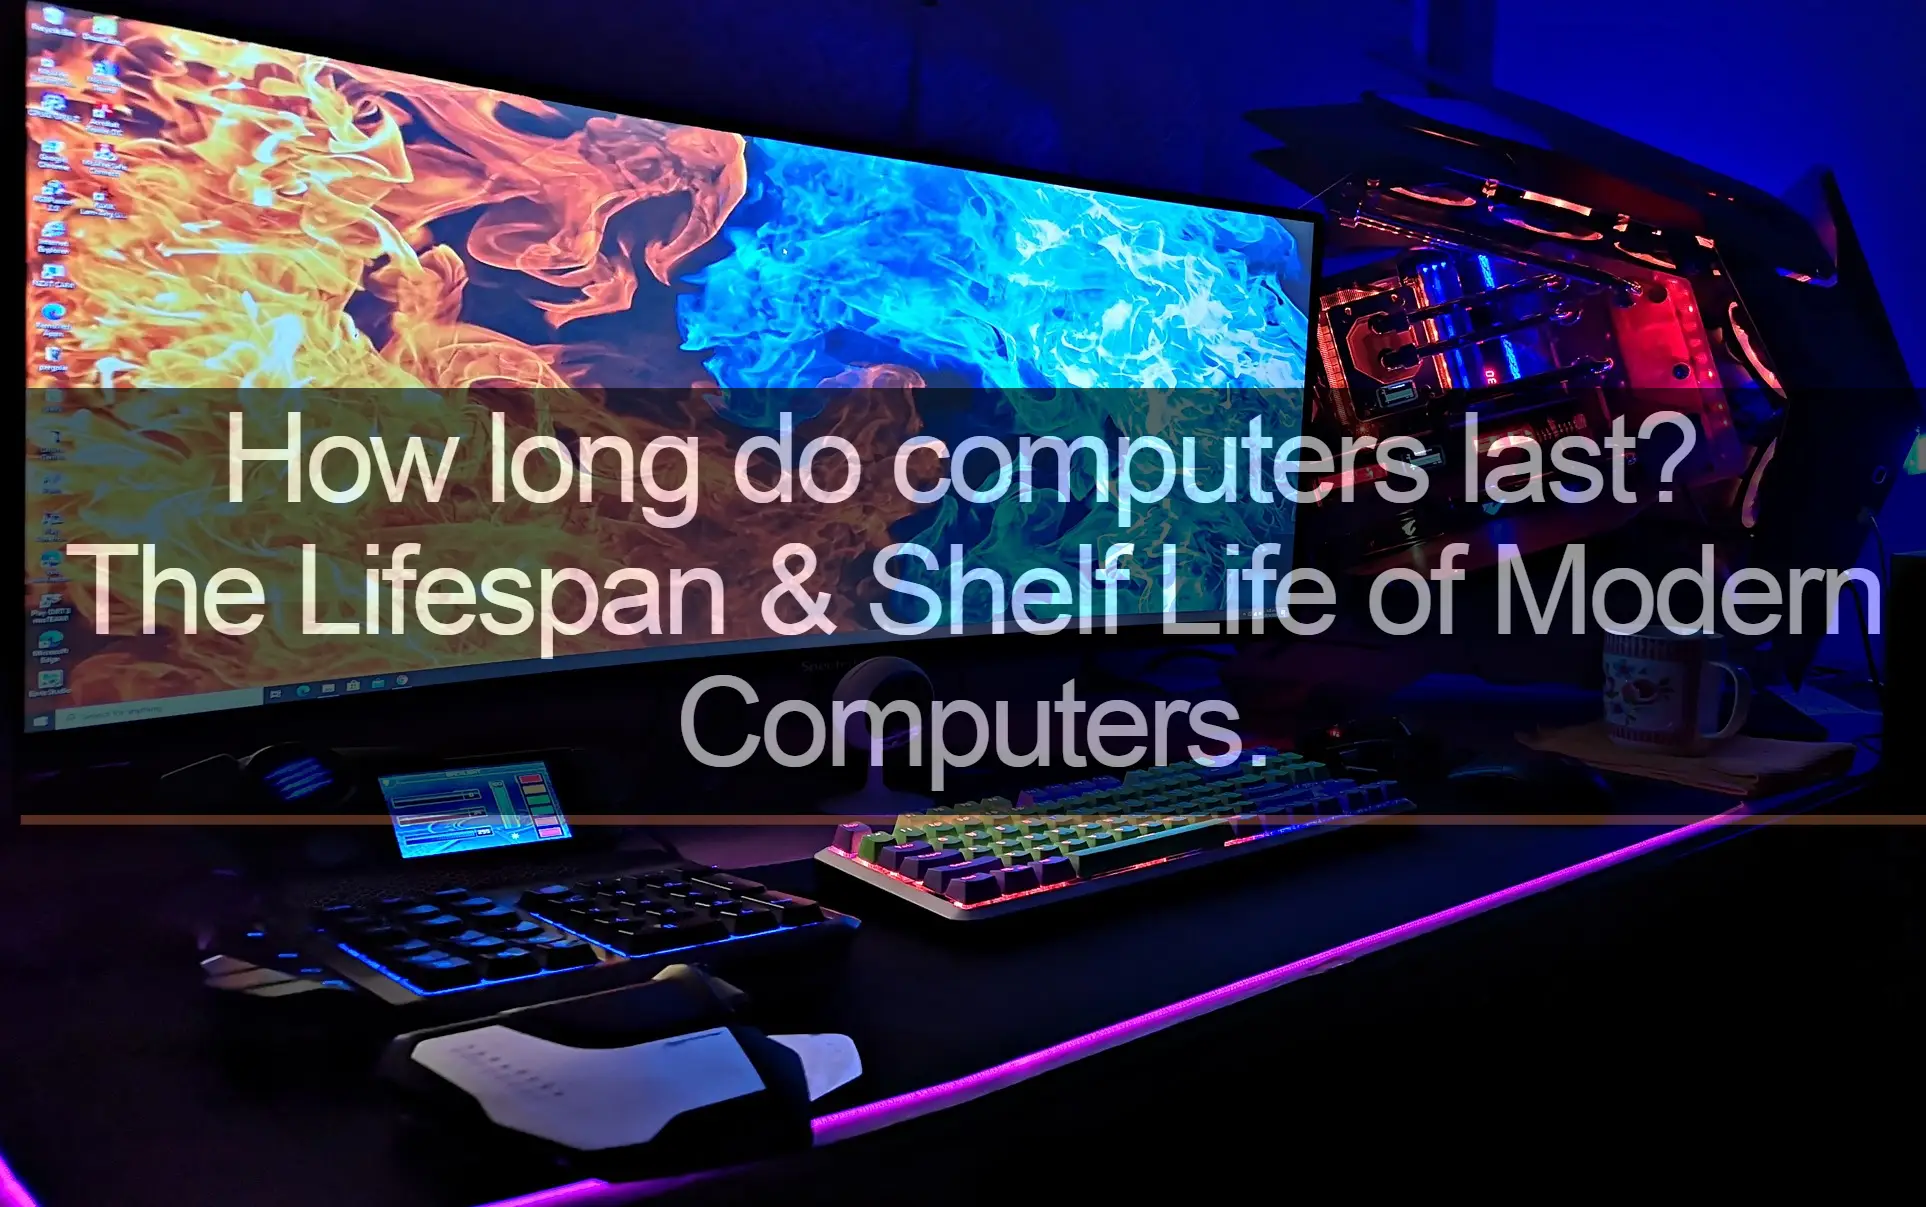 How long do computers last?